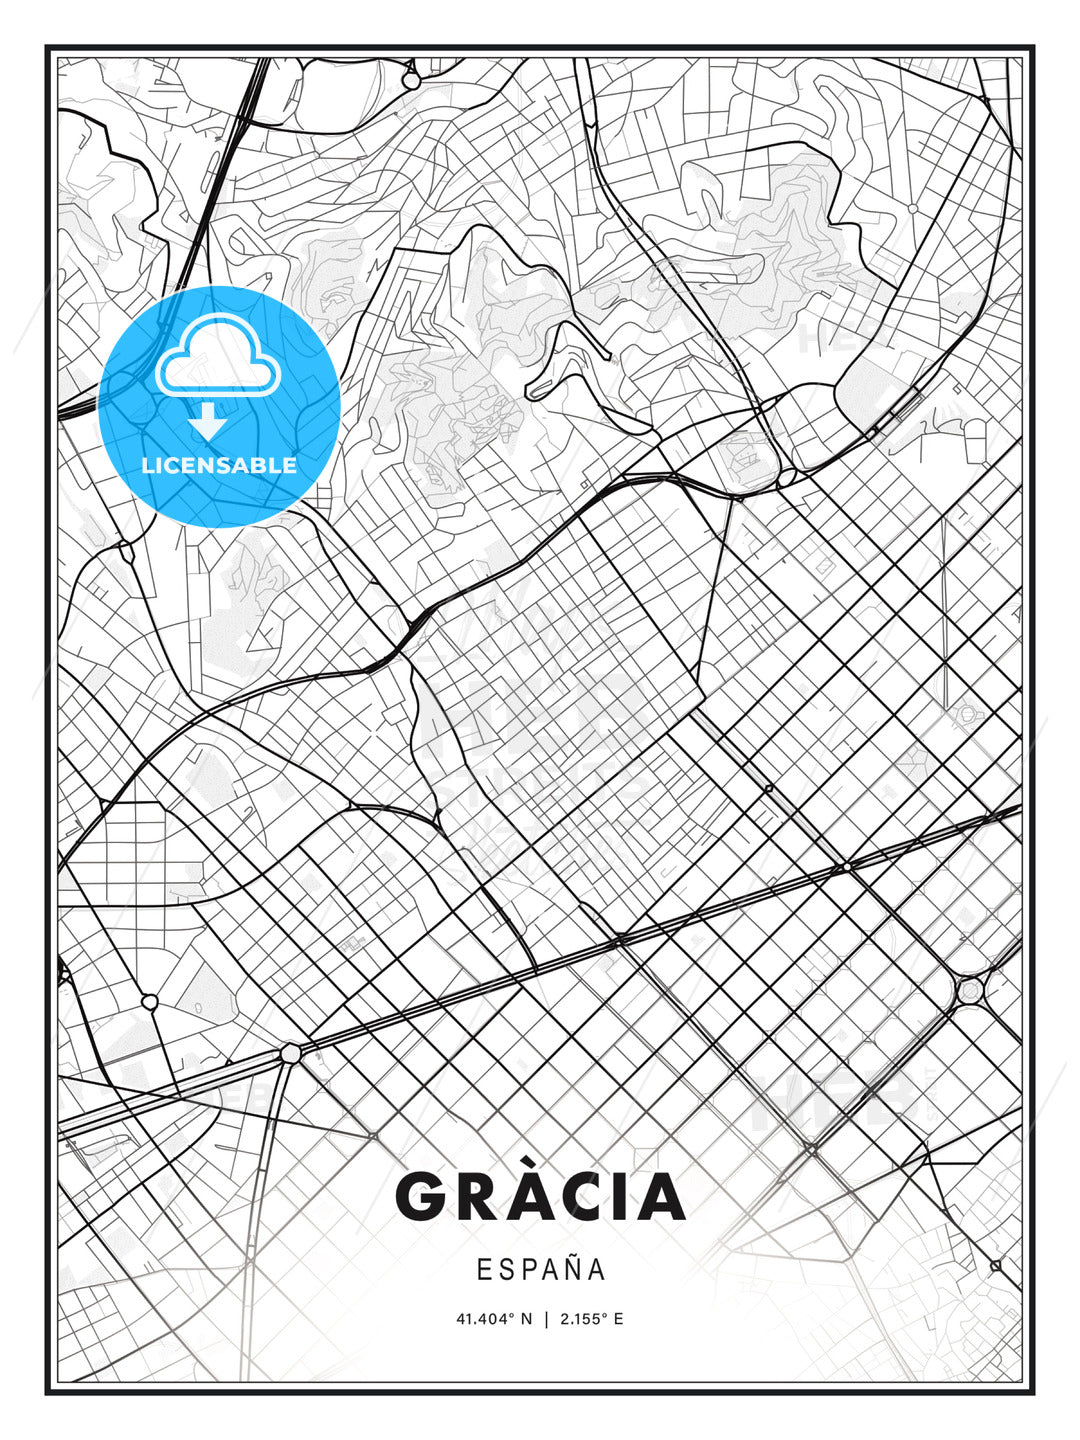 Gràcia, Spain, Modern Print Template in Various Formats - HEBSTREITS Sketches